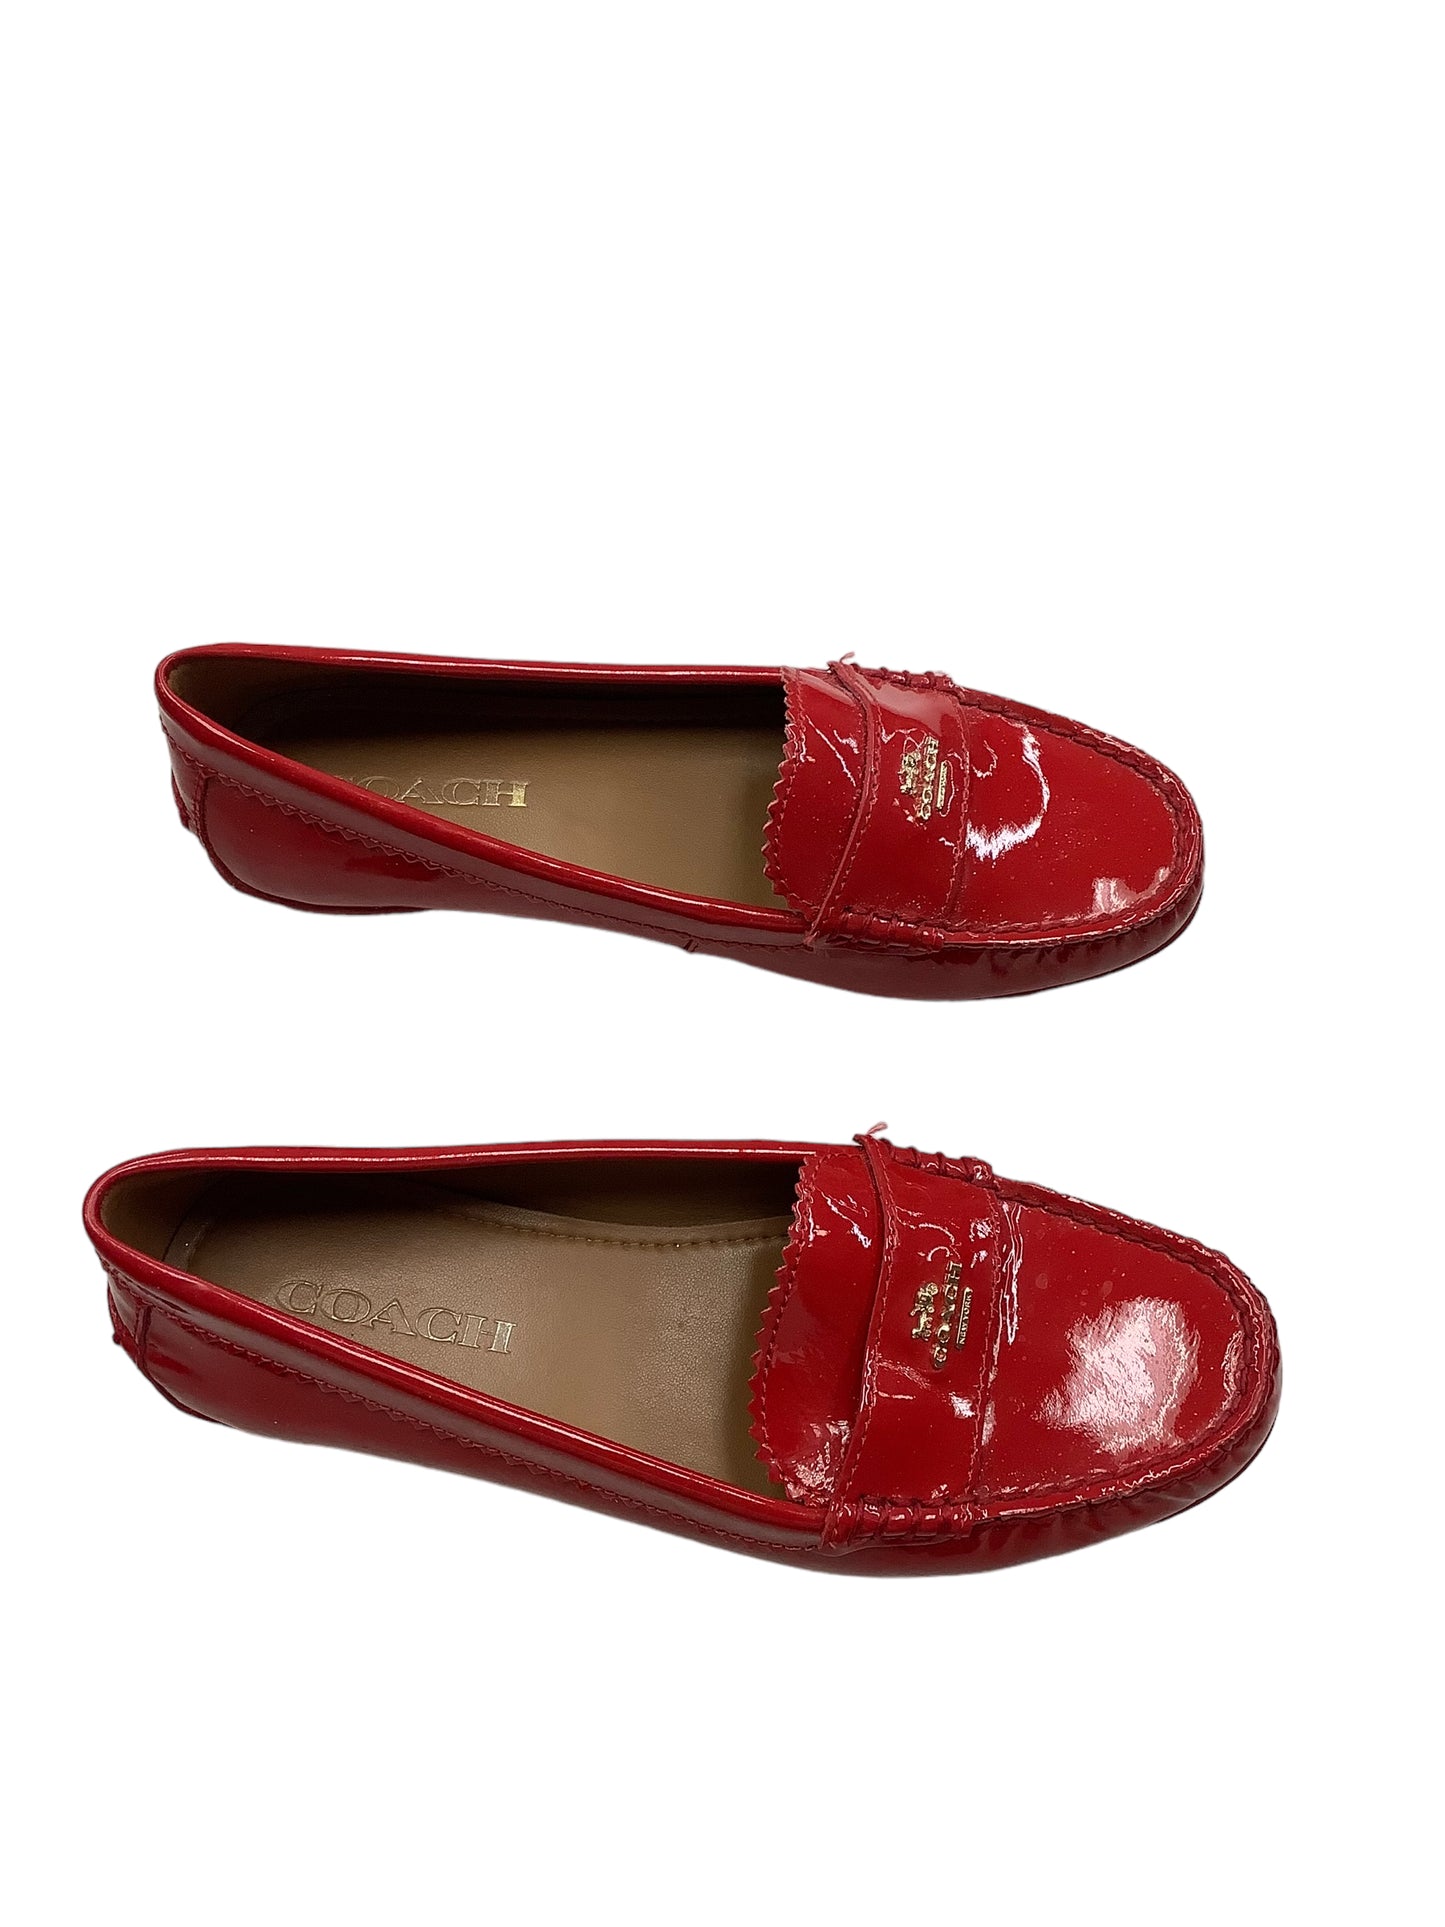 Shoes Flats Loafer Oxford By Coach  Size: 7